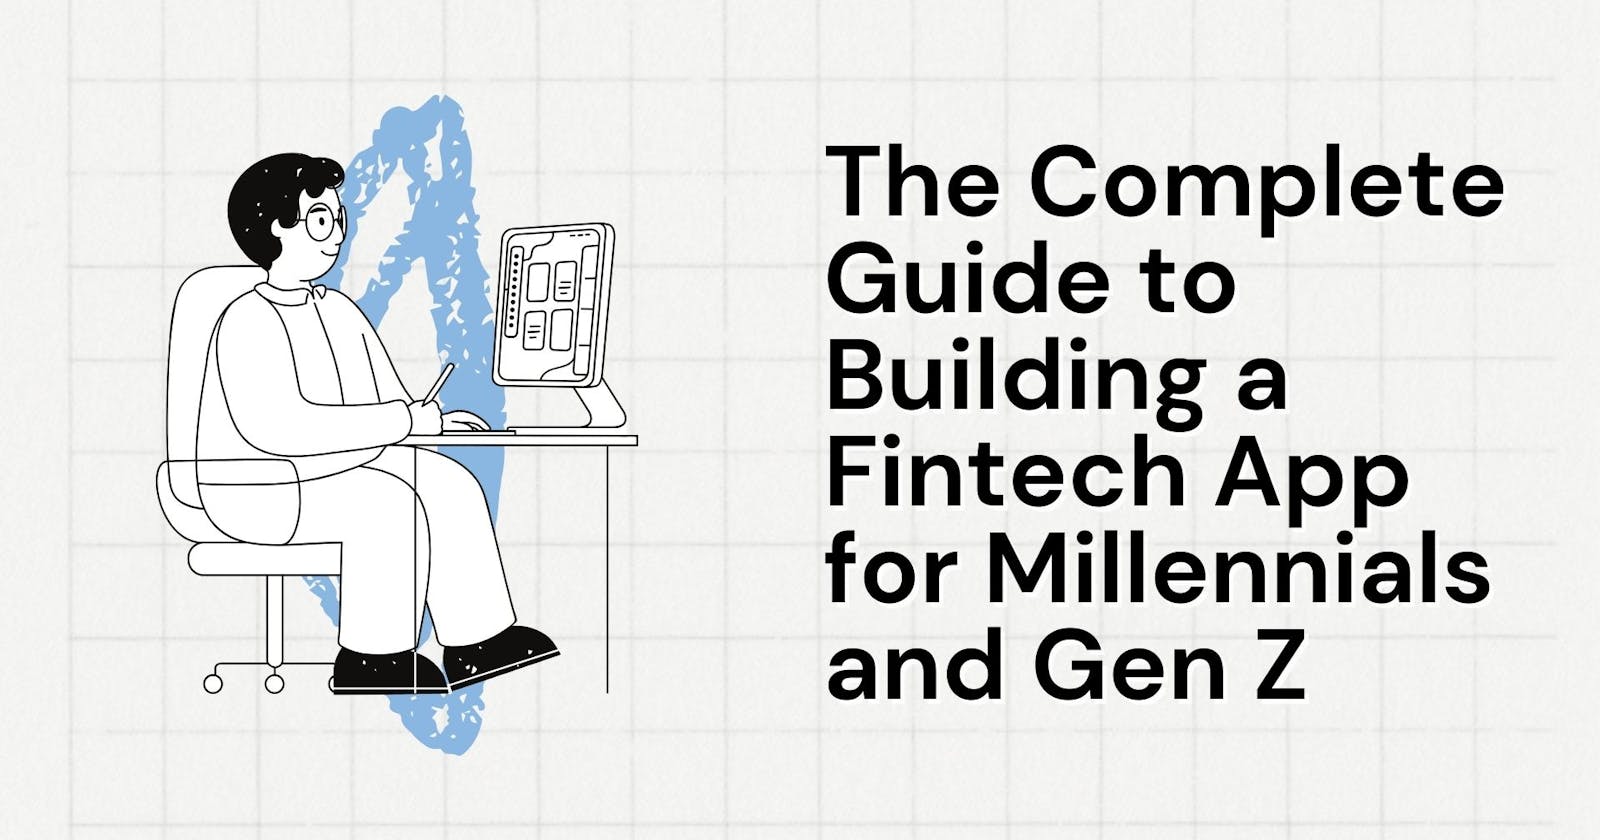 The Complete Guide to Building a Fintech App for Millennials and Gen Z